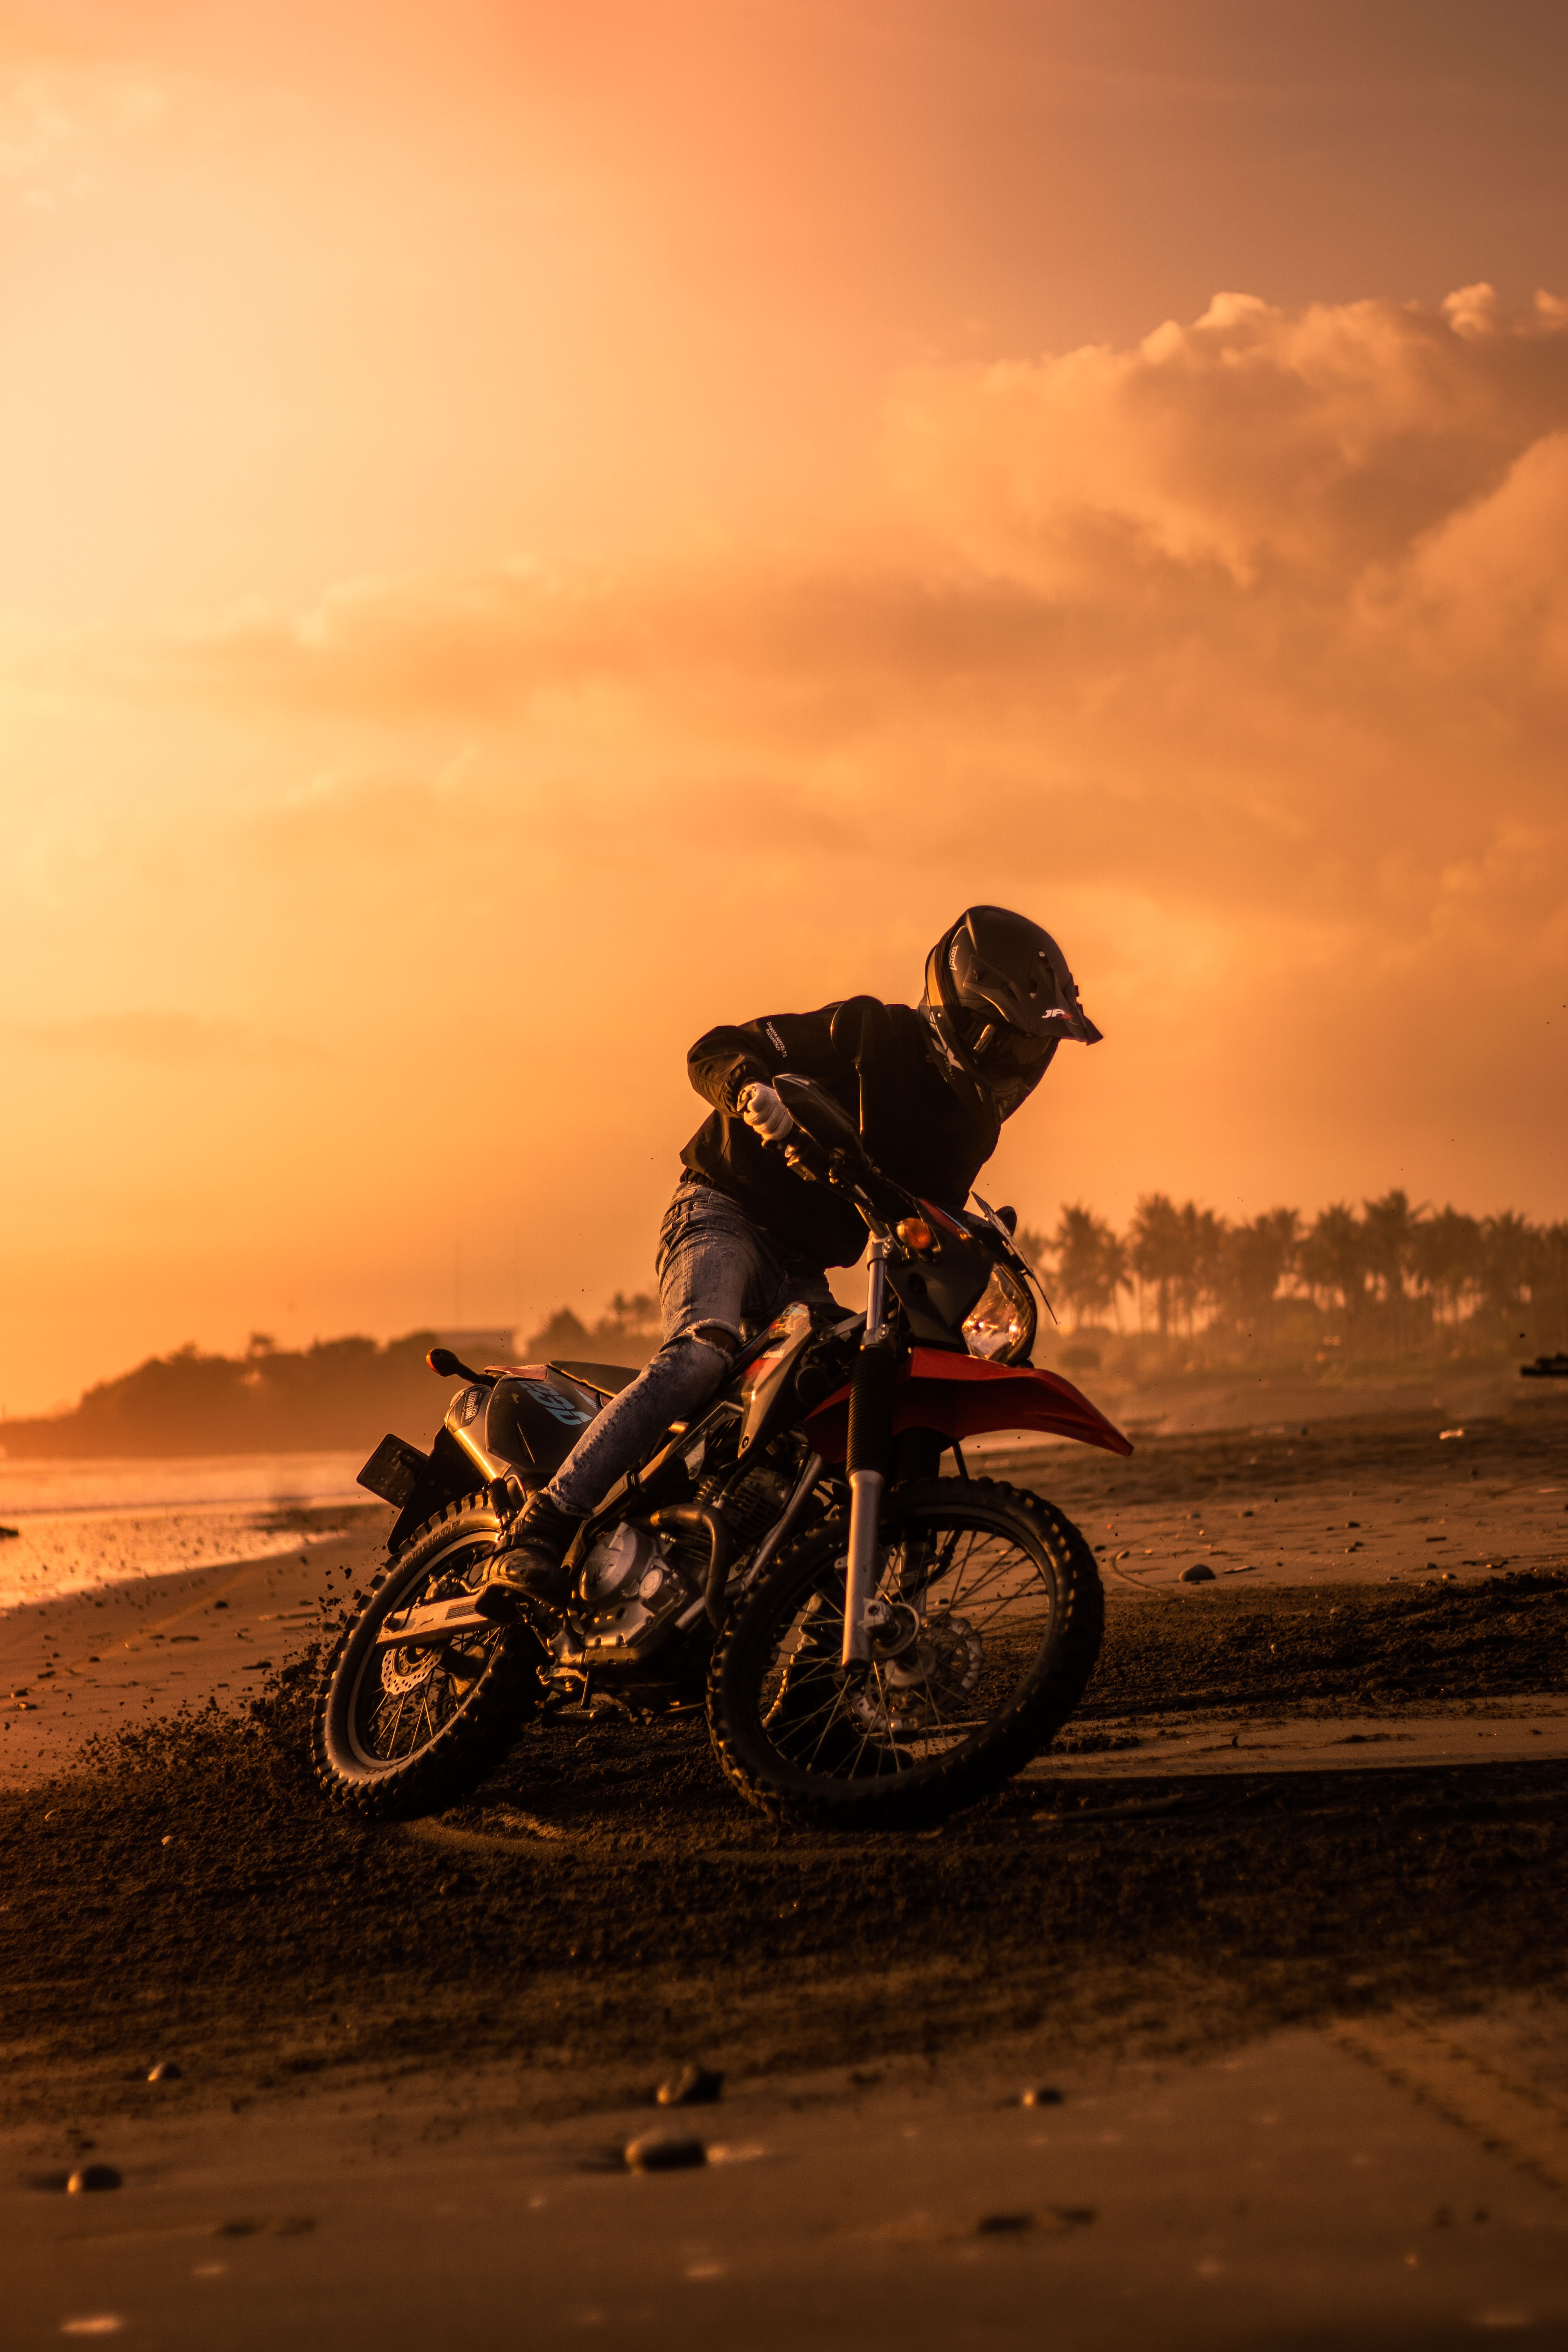 bike, motorcycles, motorcycle, motorcyclist, beach, cross for android